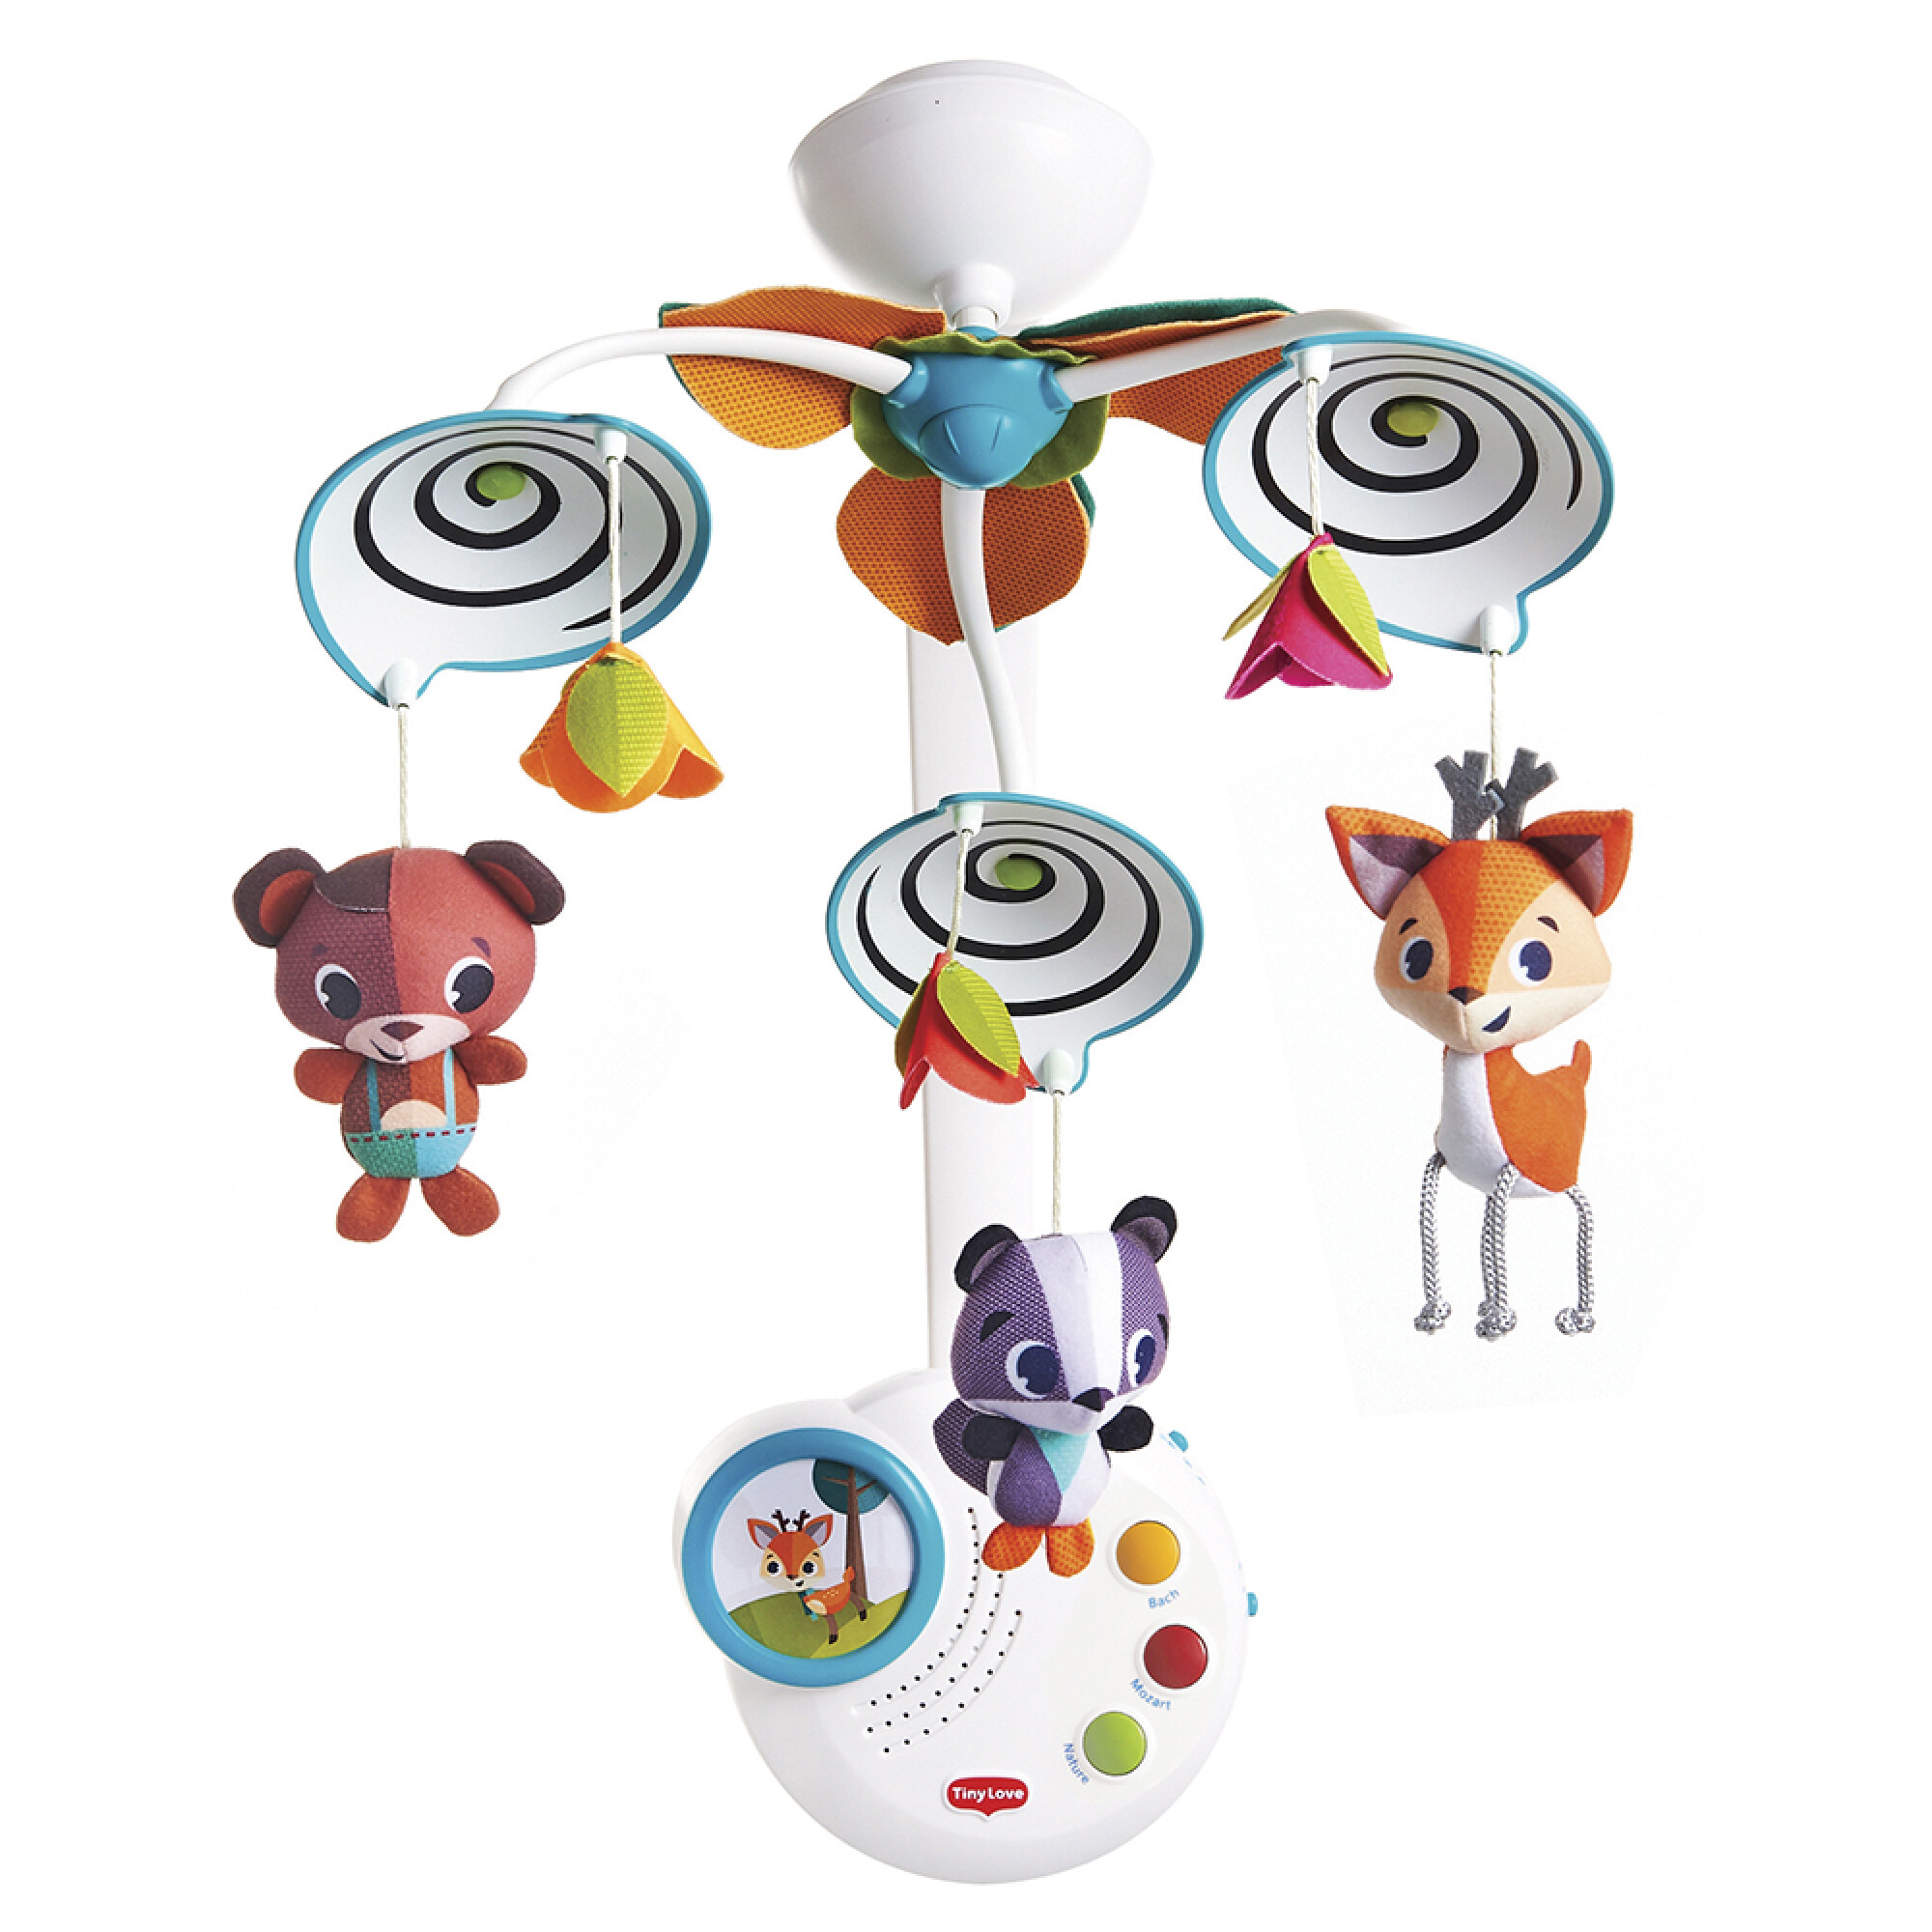 Parque Cuna Viaje Mirage de Milly Mally - LittleCocoBaby